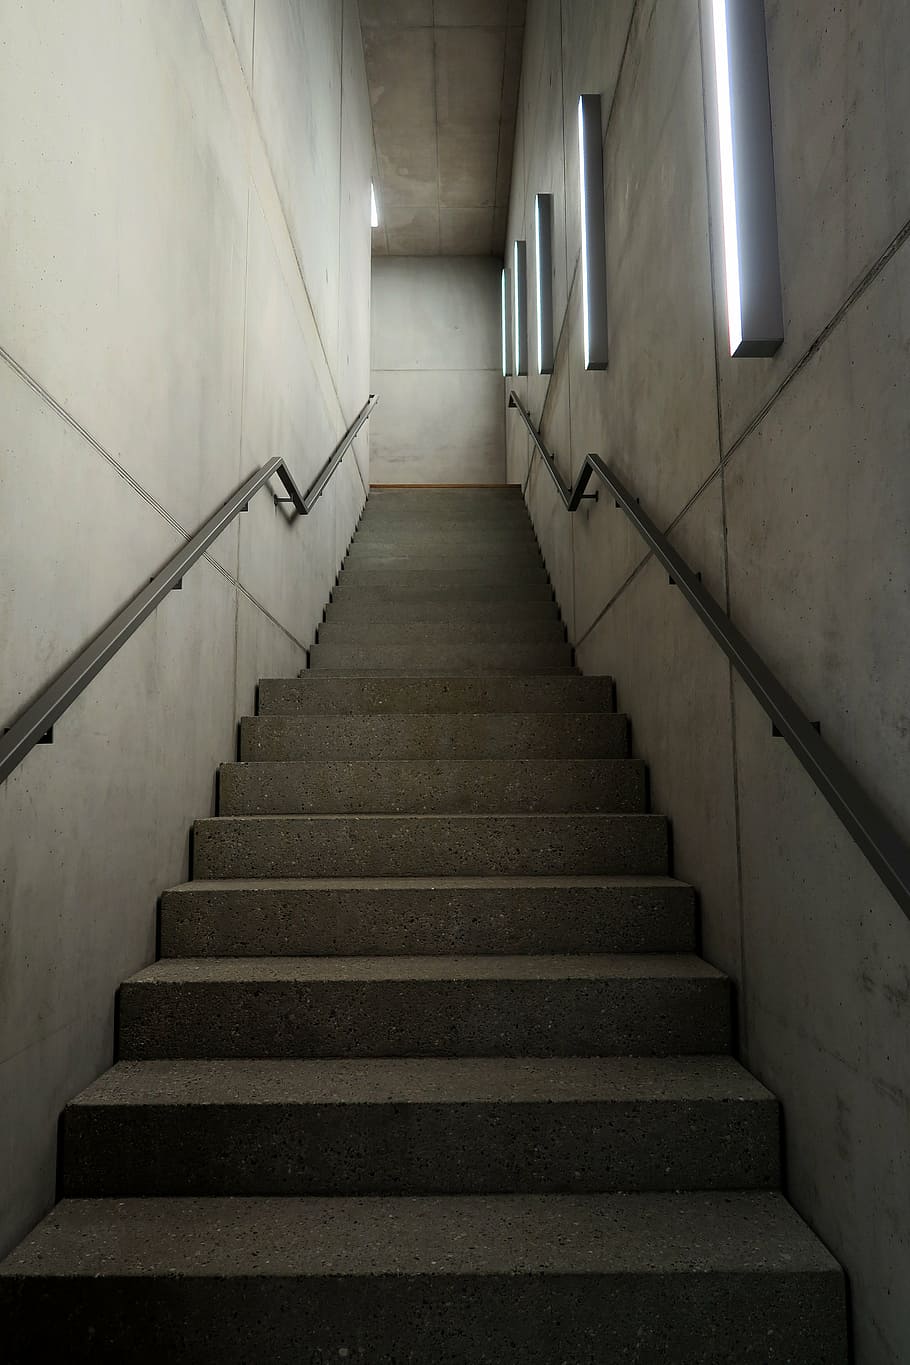 stairs, staircase, gradually, architecture, interior design, building, upward, modern, concrete, indoors